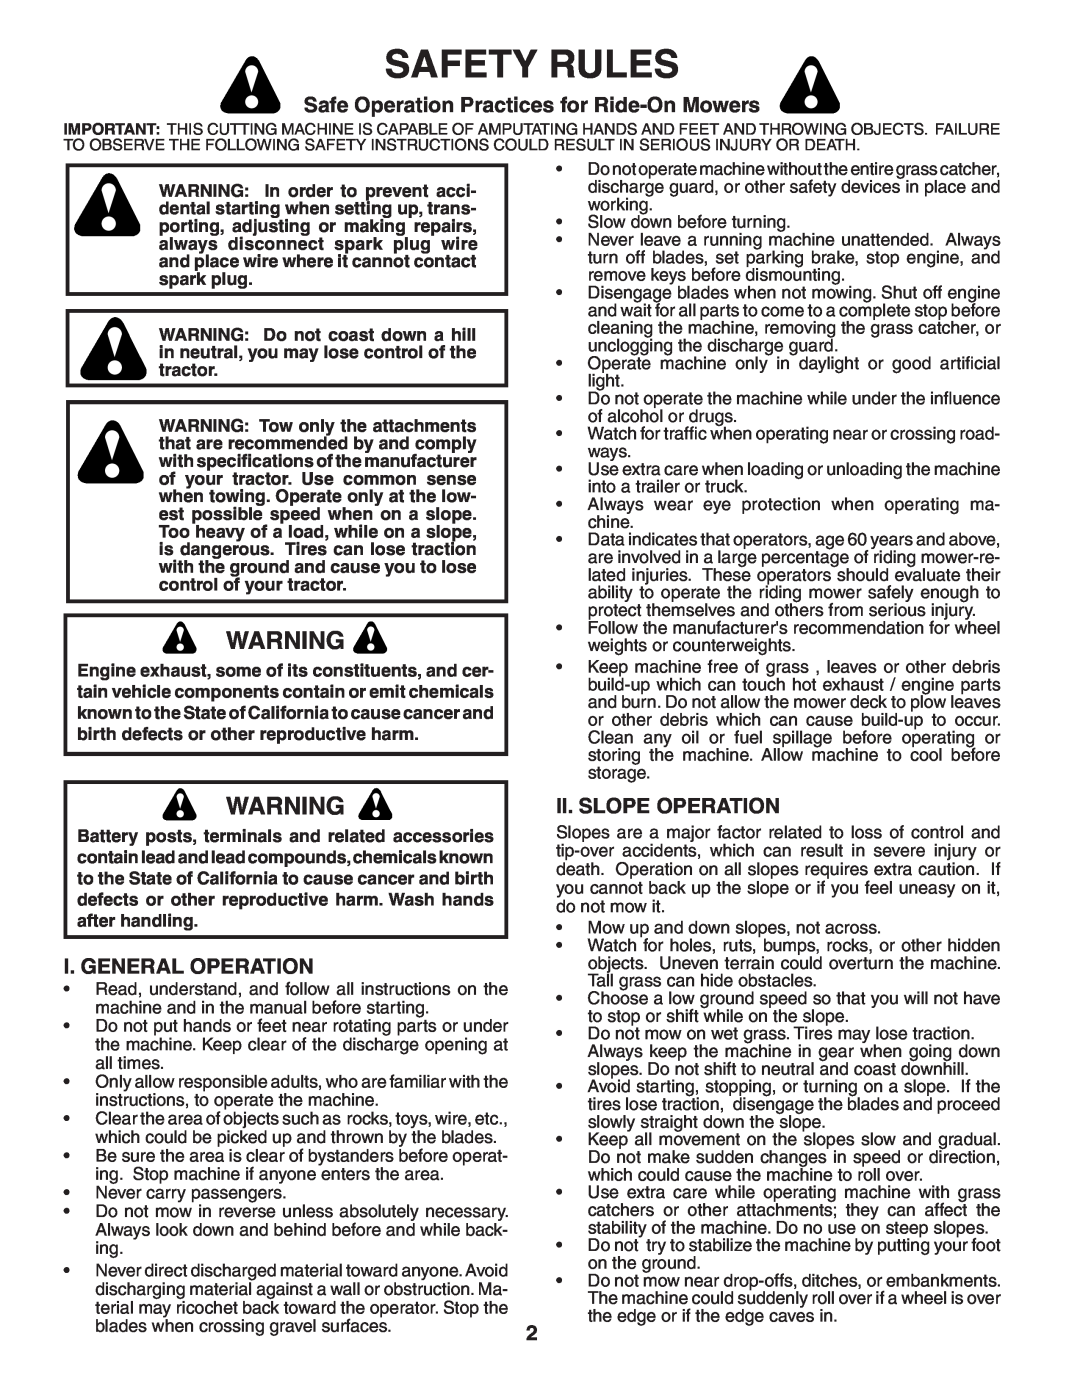 Poulan 403444 manual Safety Rules, Safe Operation Practices for Ride-On Mowers, I. General Operation, Ii. Slope Operation 